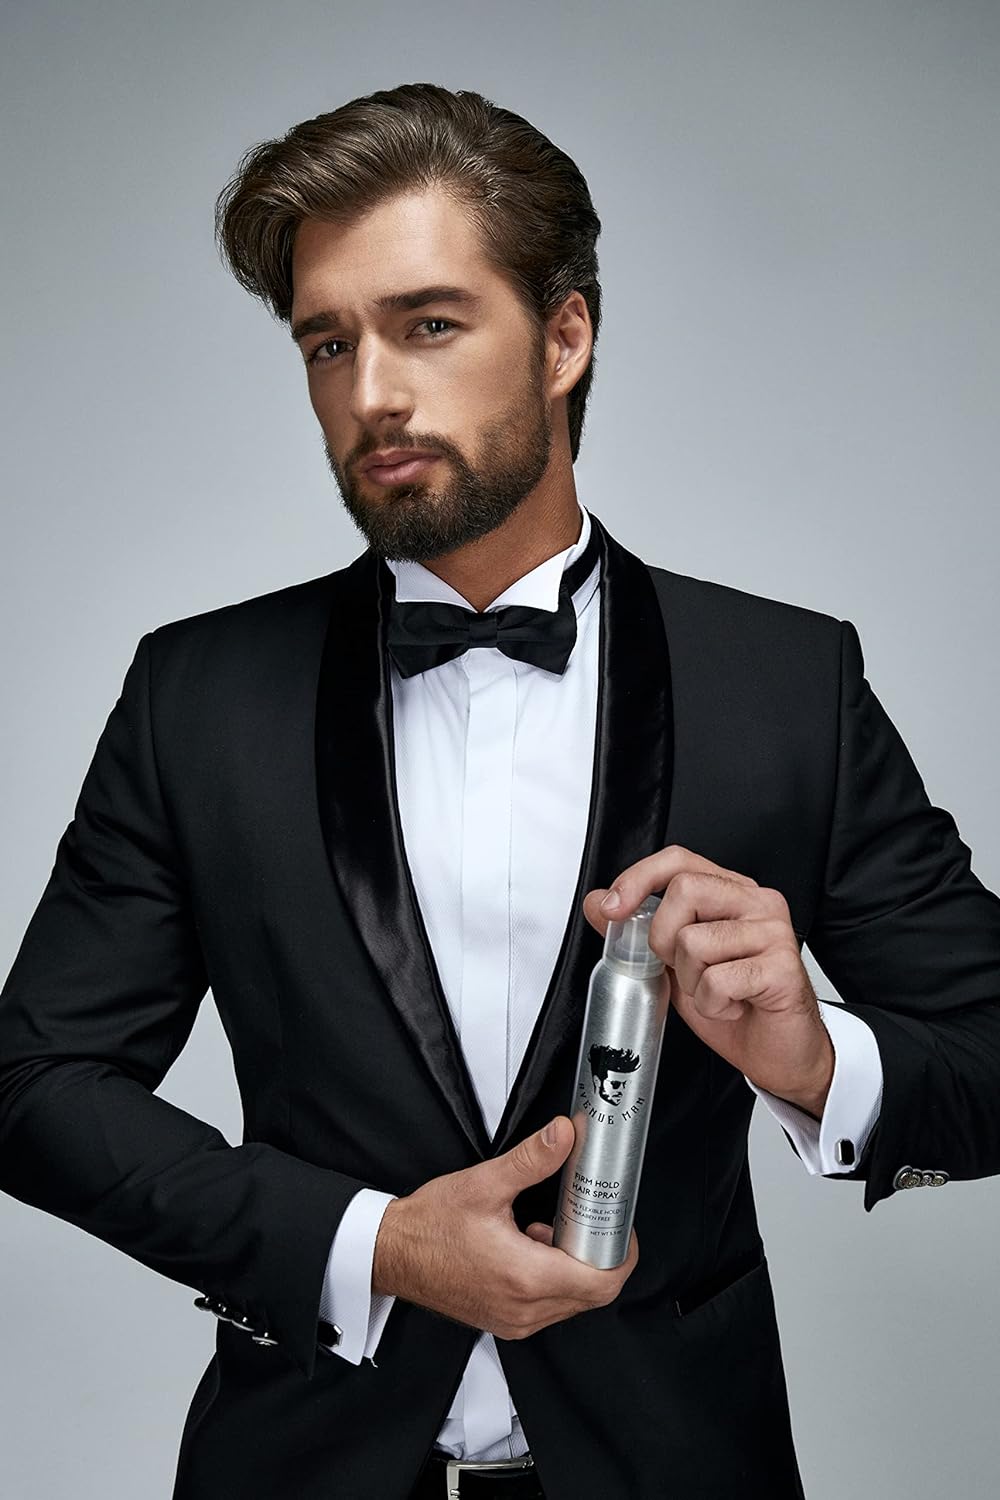 Firm Hold Hair Spray - Hair Product for Men - Avenue Man Hair Products 